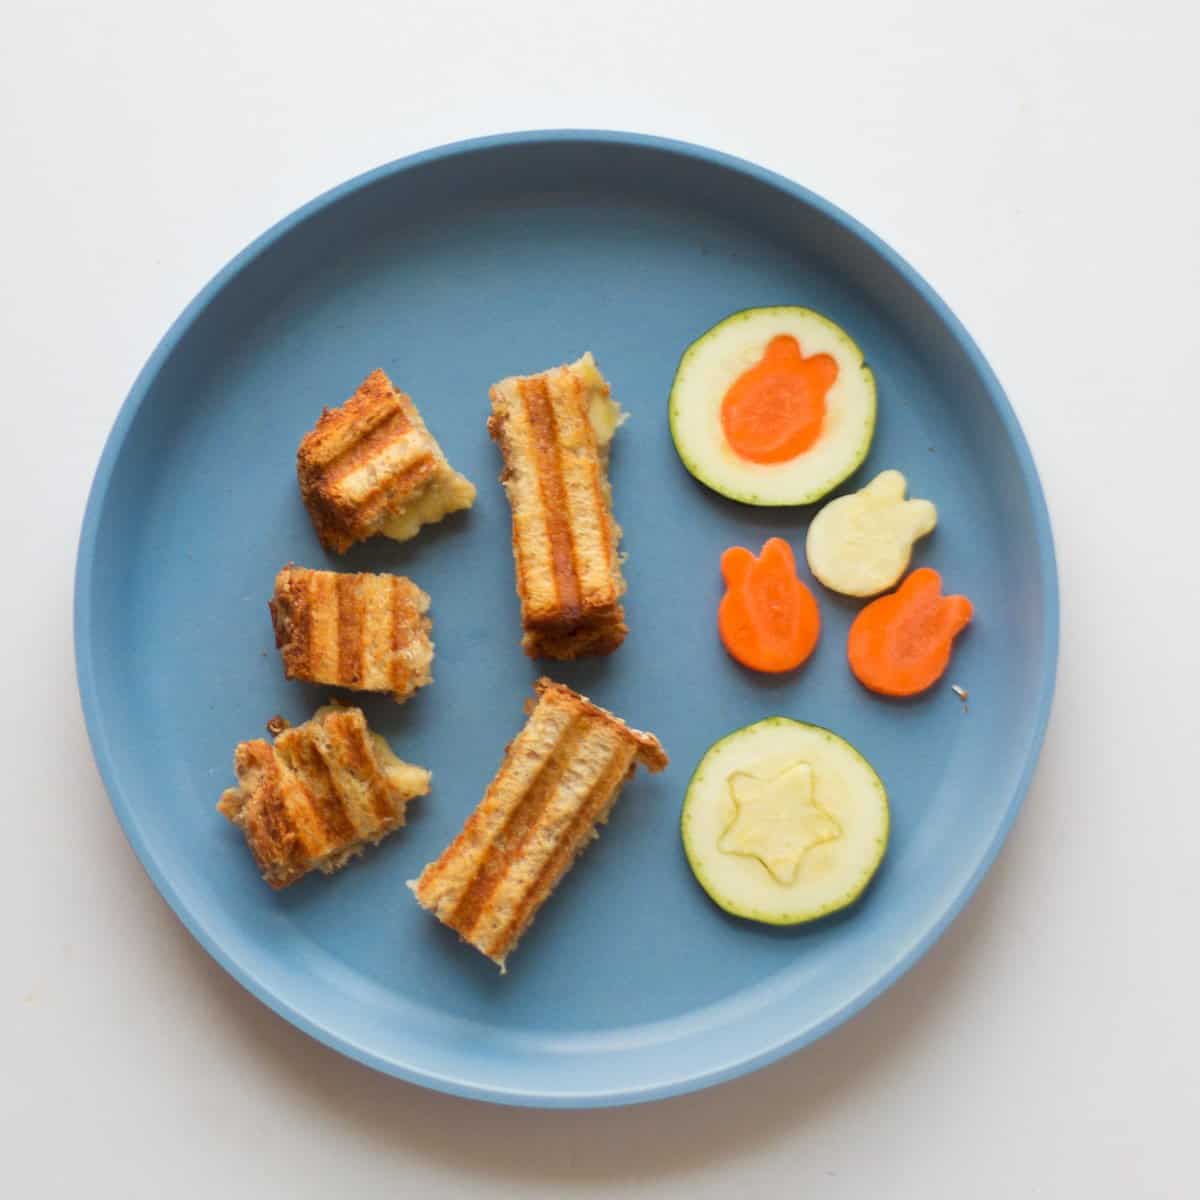 Sliced sandwich with animal shaped raw zucchini and carrots.